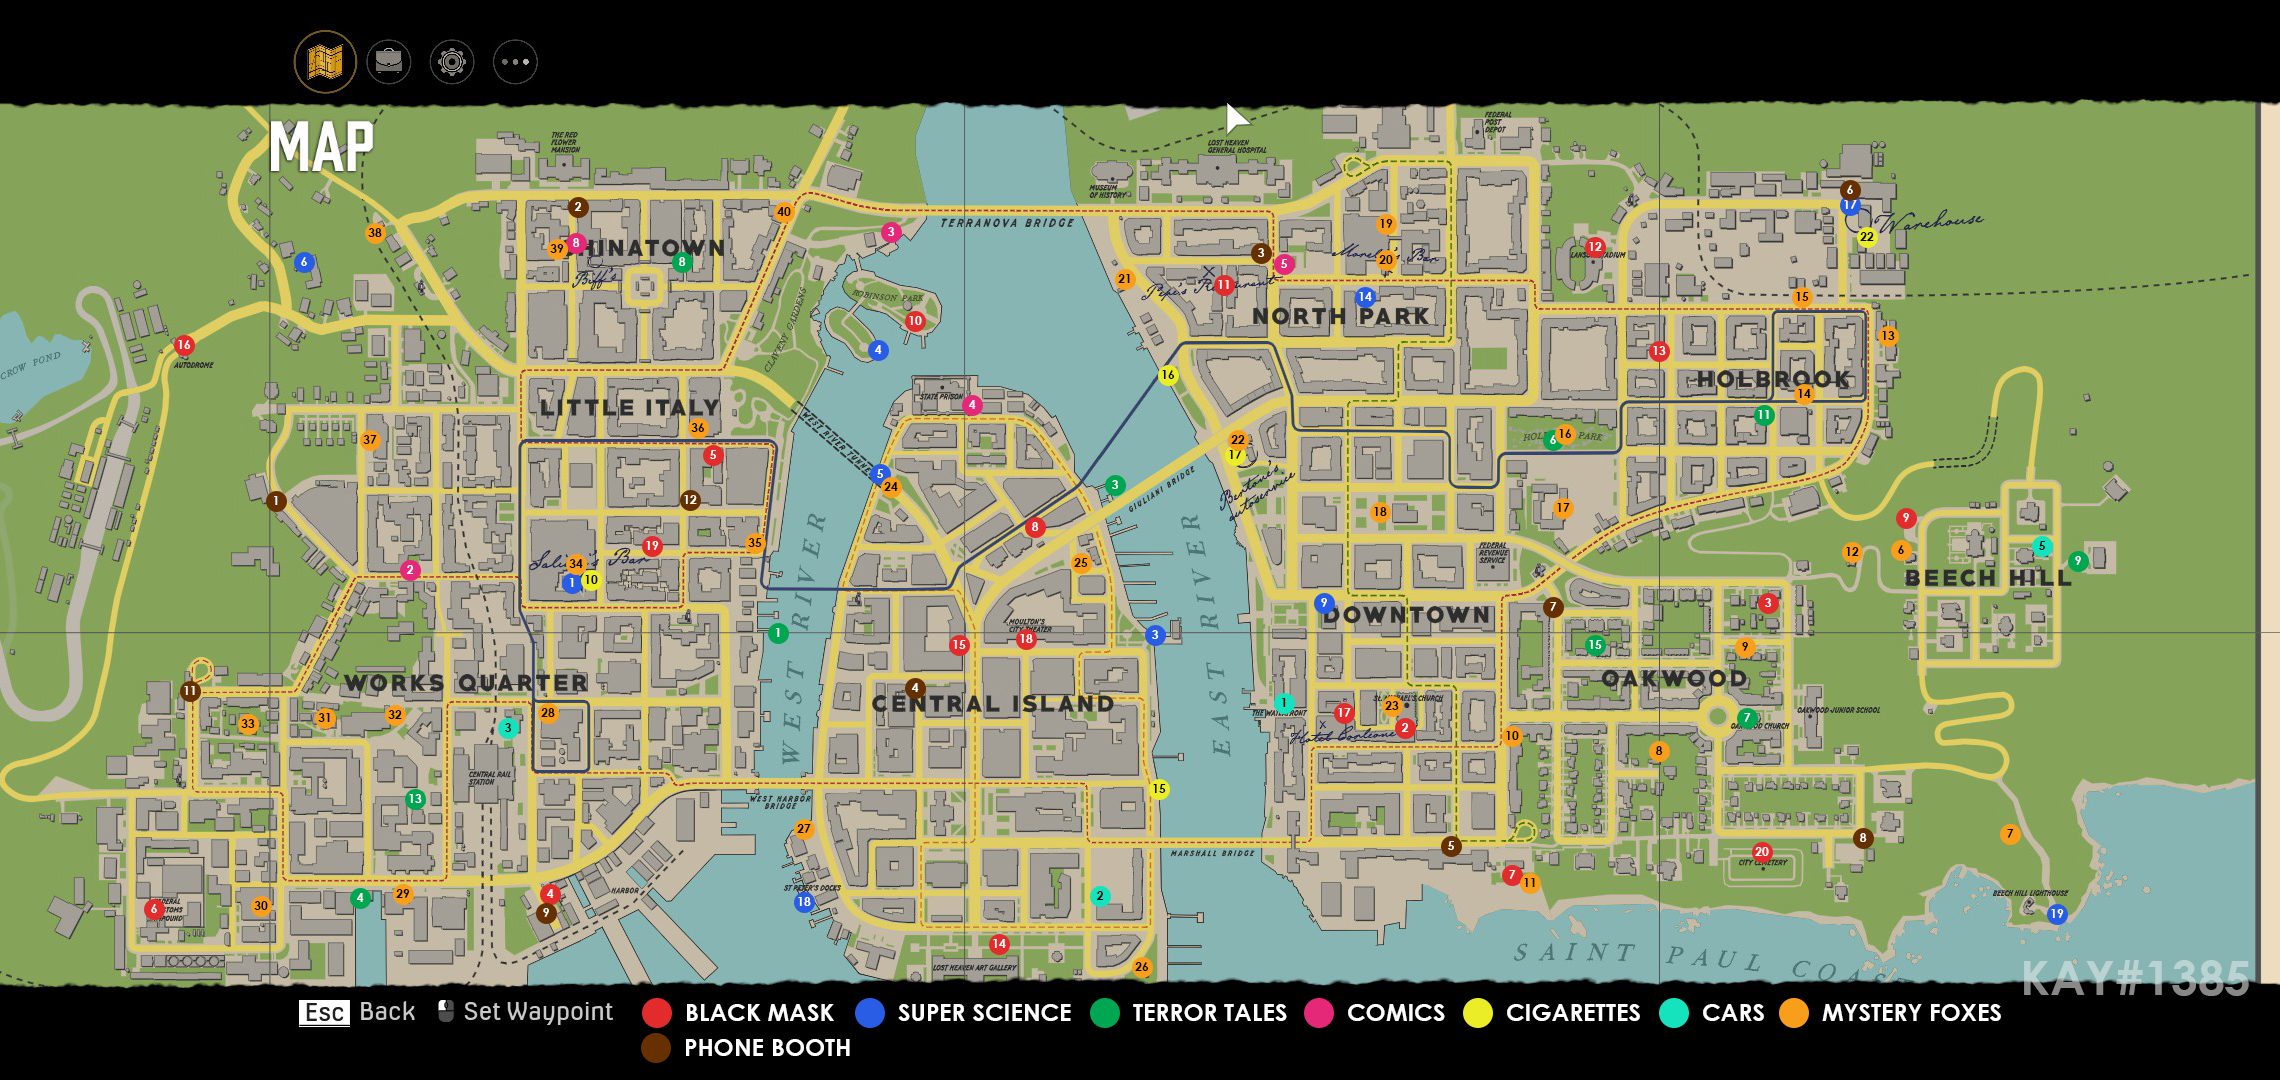 Steam Community :: Guide :: Maps and collectibles locations